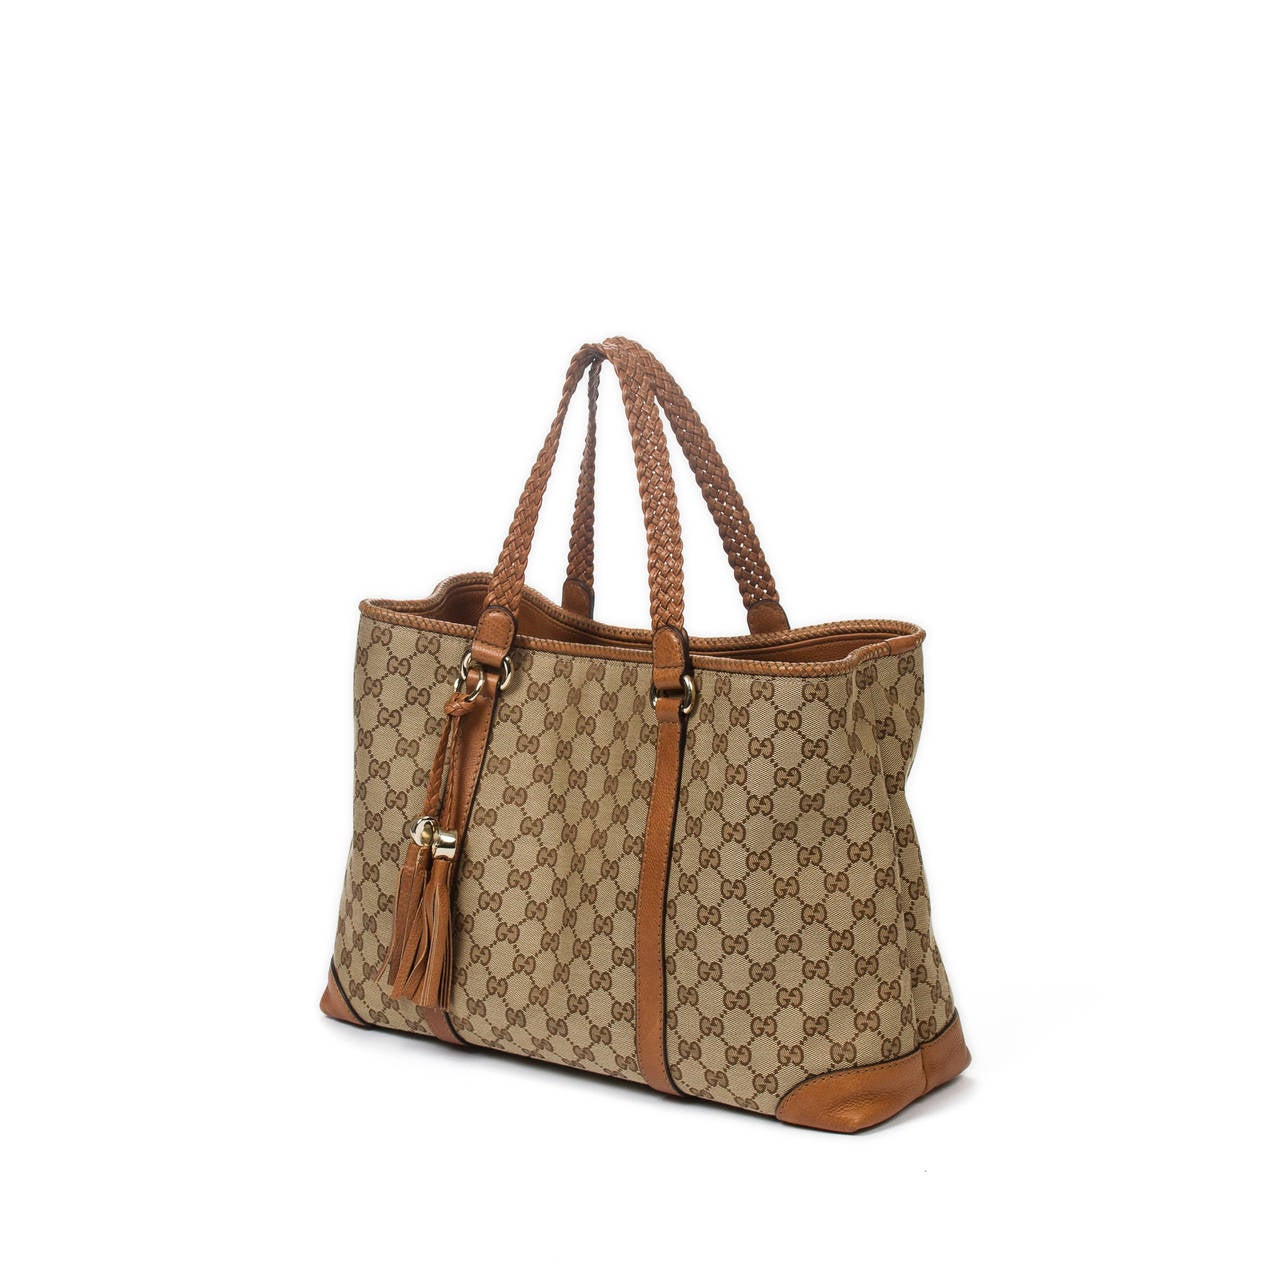 Gucci Tote in beige monogrammed canvas with tan leather braided handles with tassel pendant and gold tone hardware. Line interior in beige canvas monogram with zip compartment, 2 slip pocket and one zip pocket. Close to new condition.